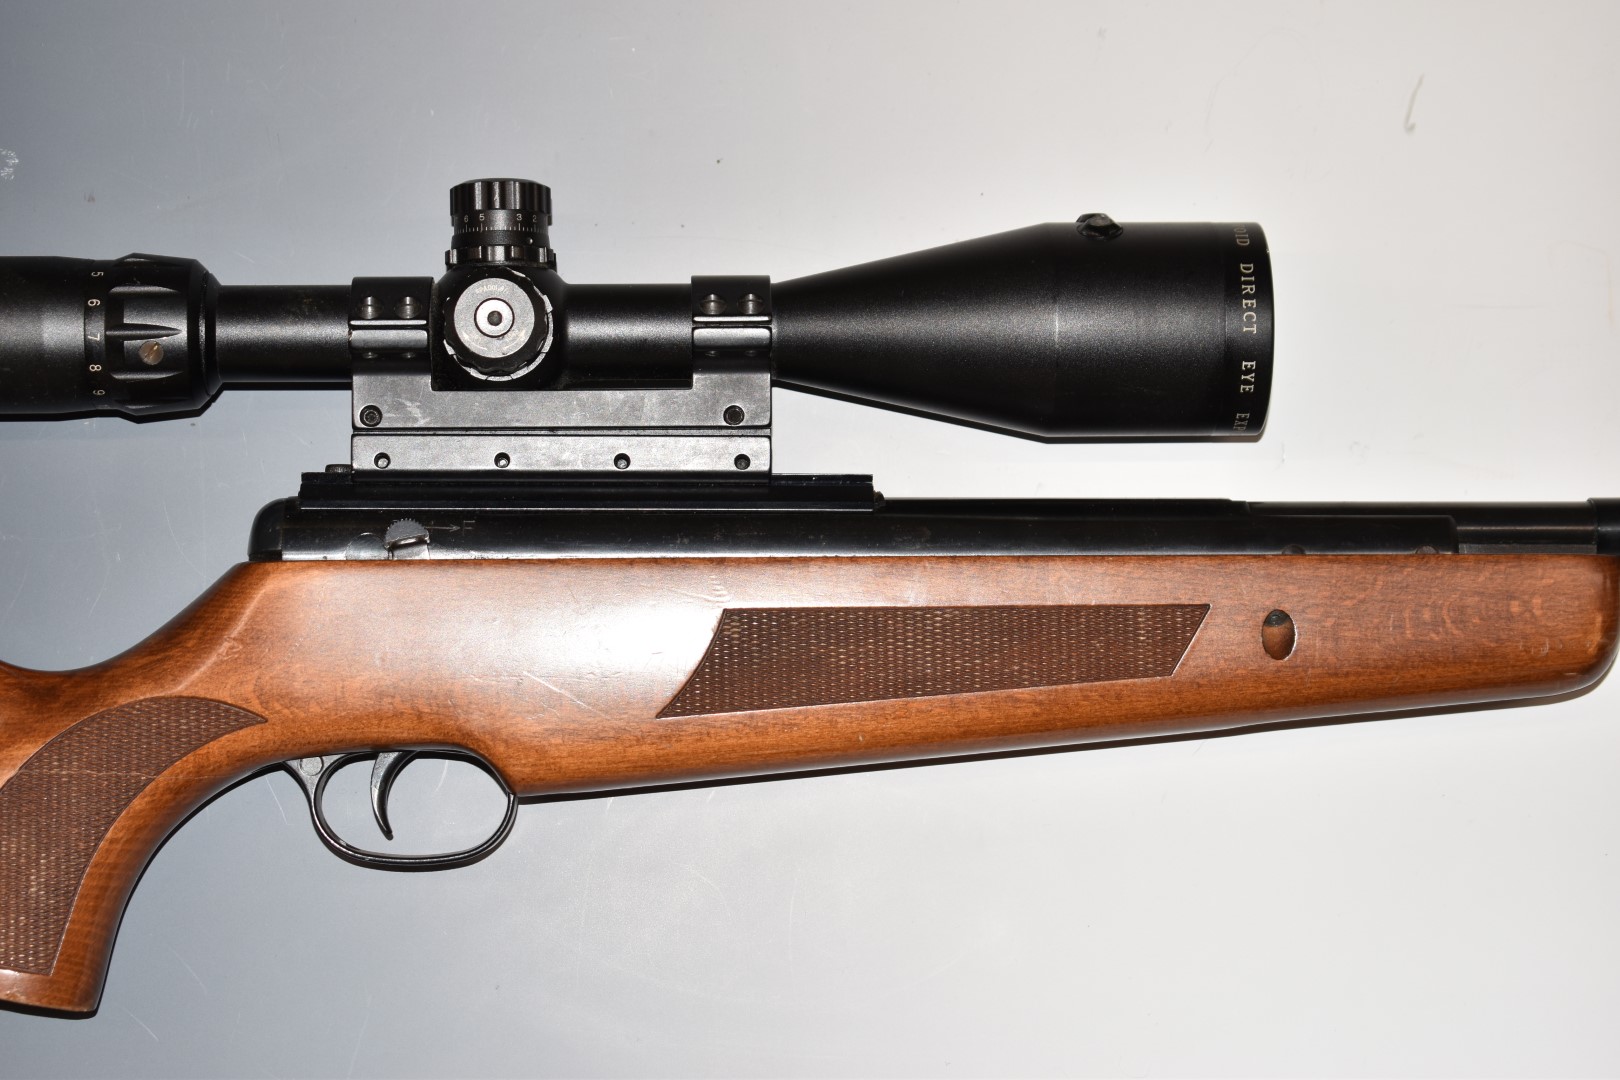 BSA .22 air rifle with chequered semi-pistol grip and forend, raised cheek piece, sound moderator - Image 4 of 10